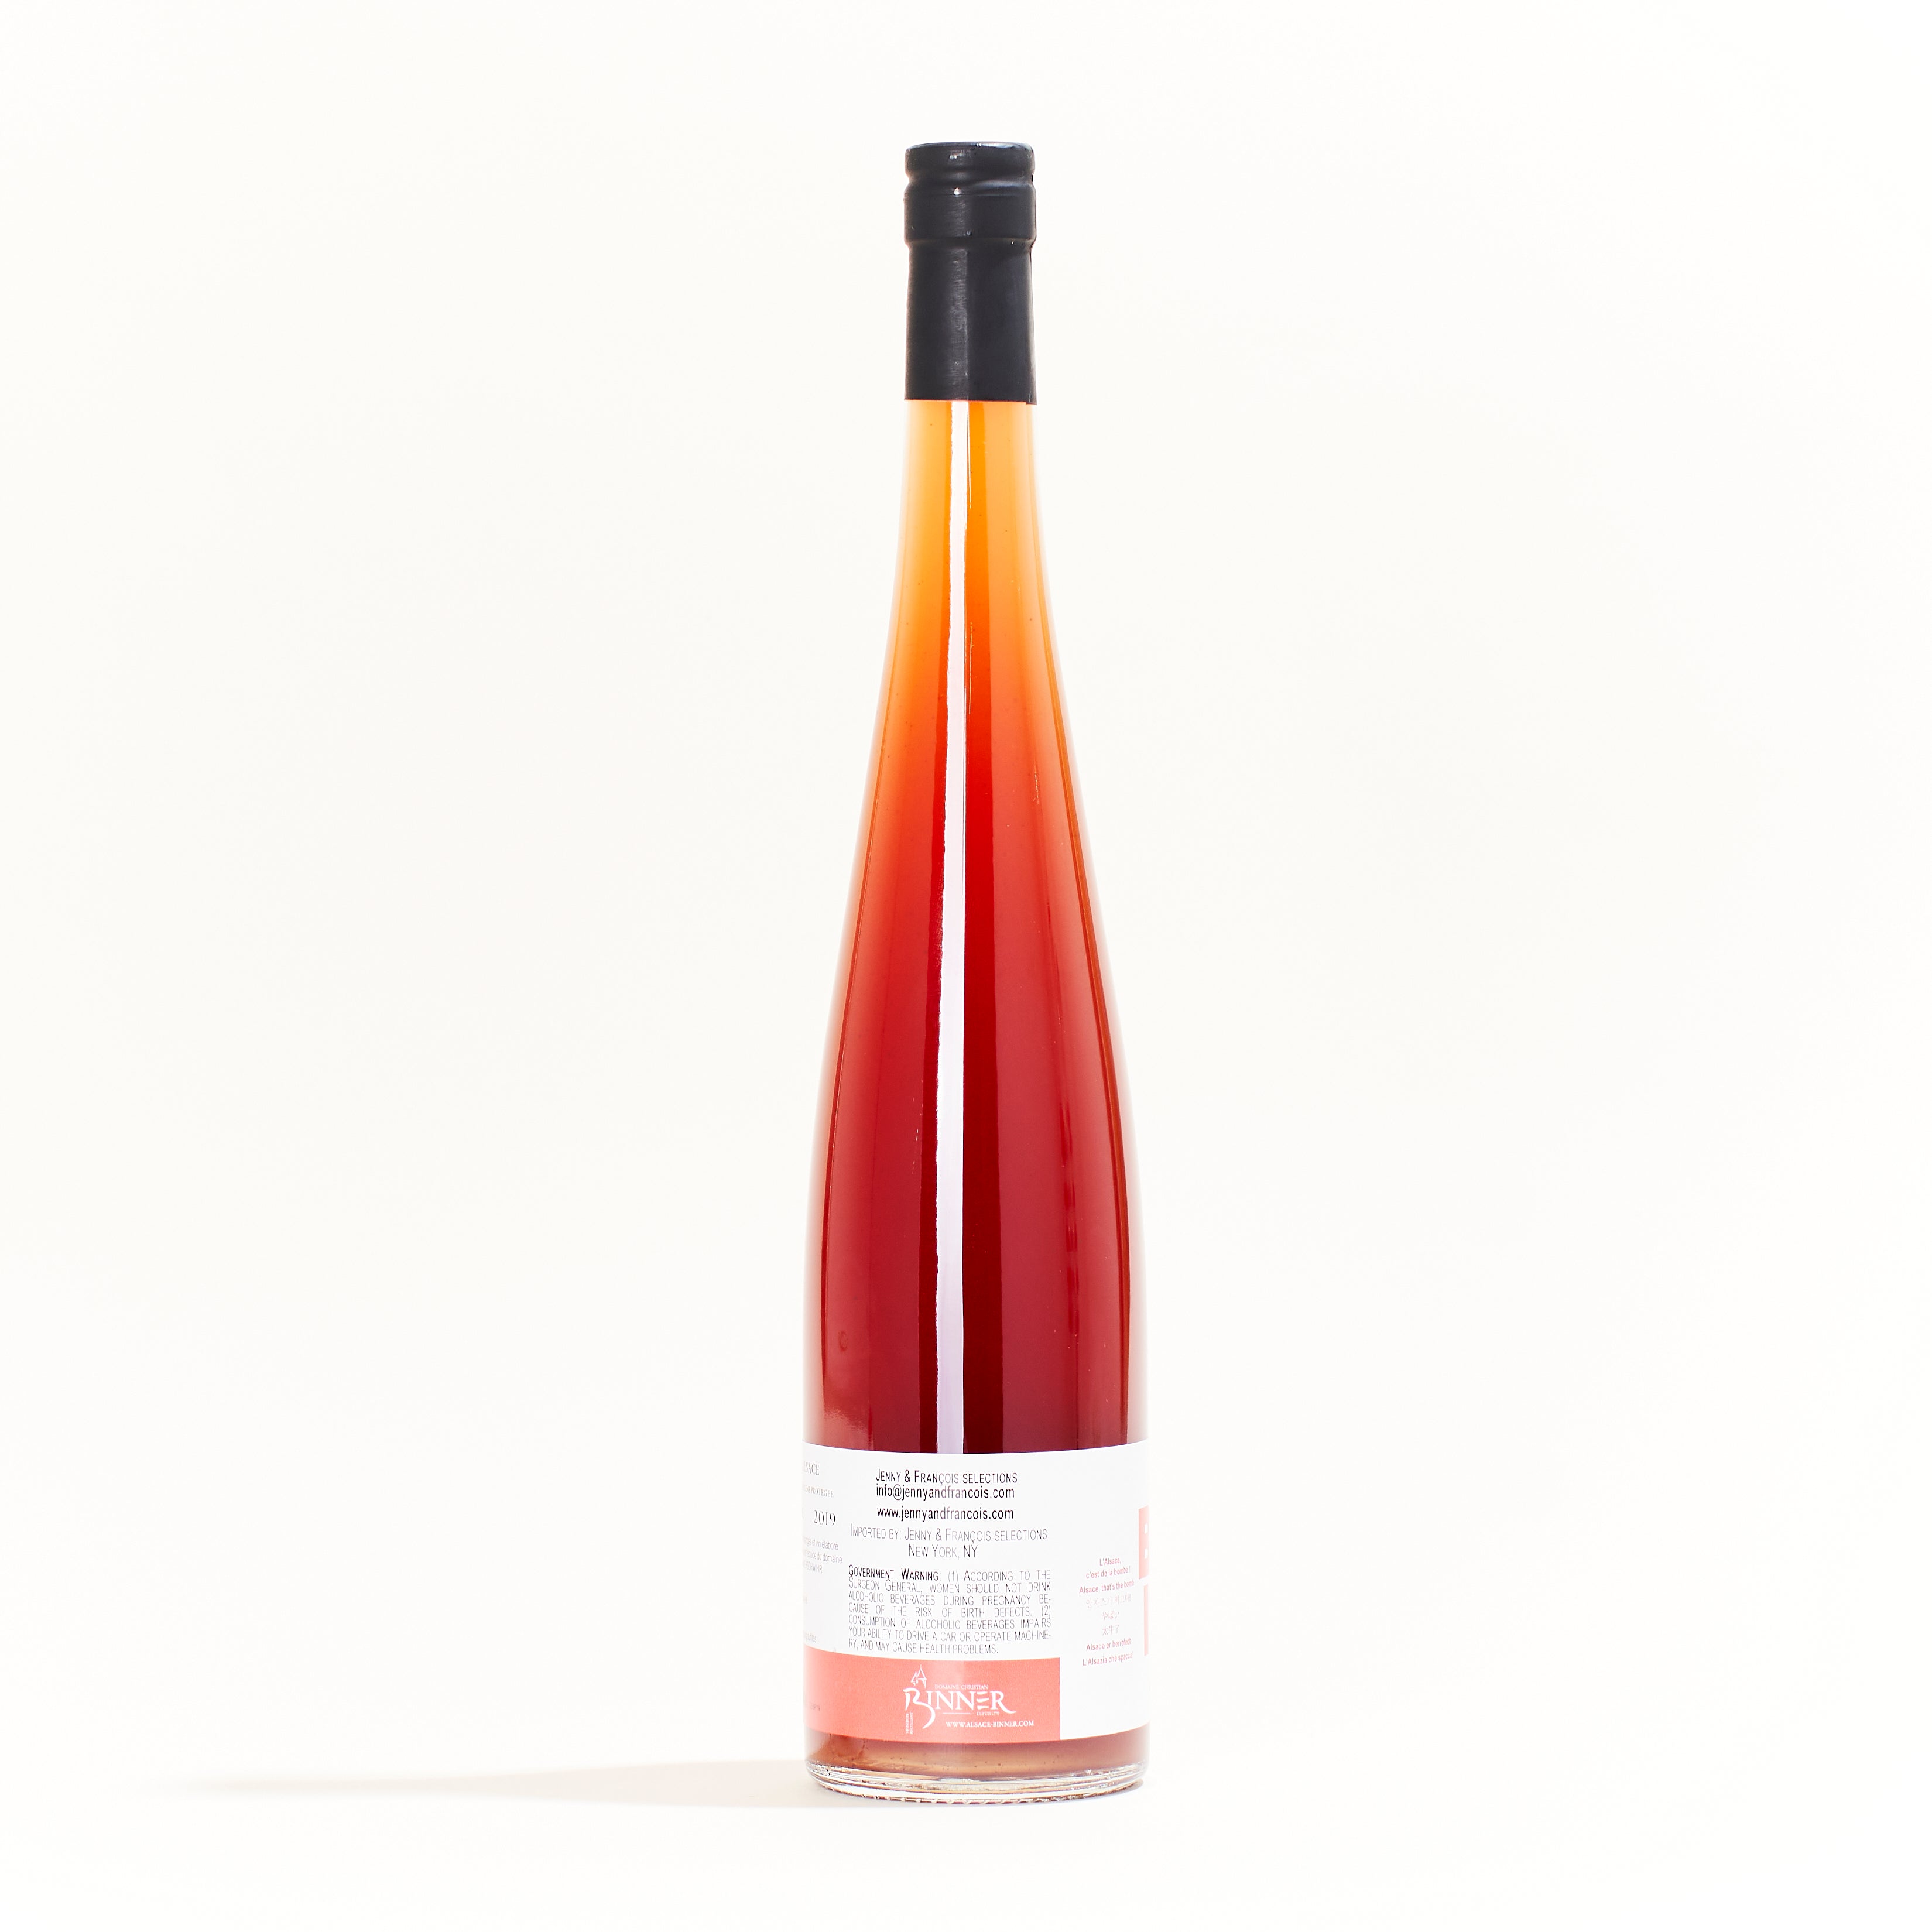 Bombisch, by Binner, a natural Red Wine from Alsace, France. Made from Pinot Noir Pinot Gris grapes 